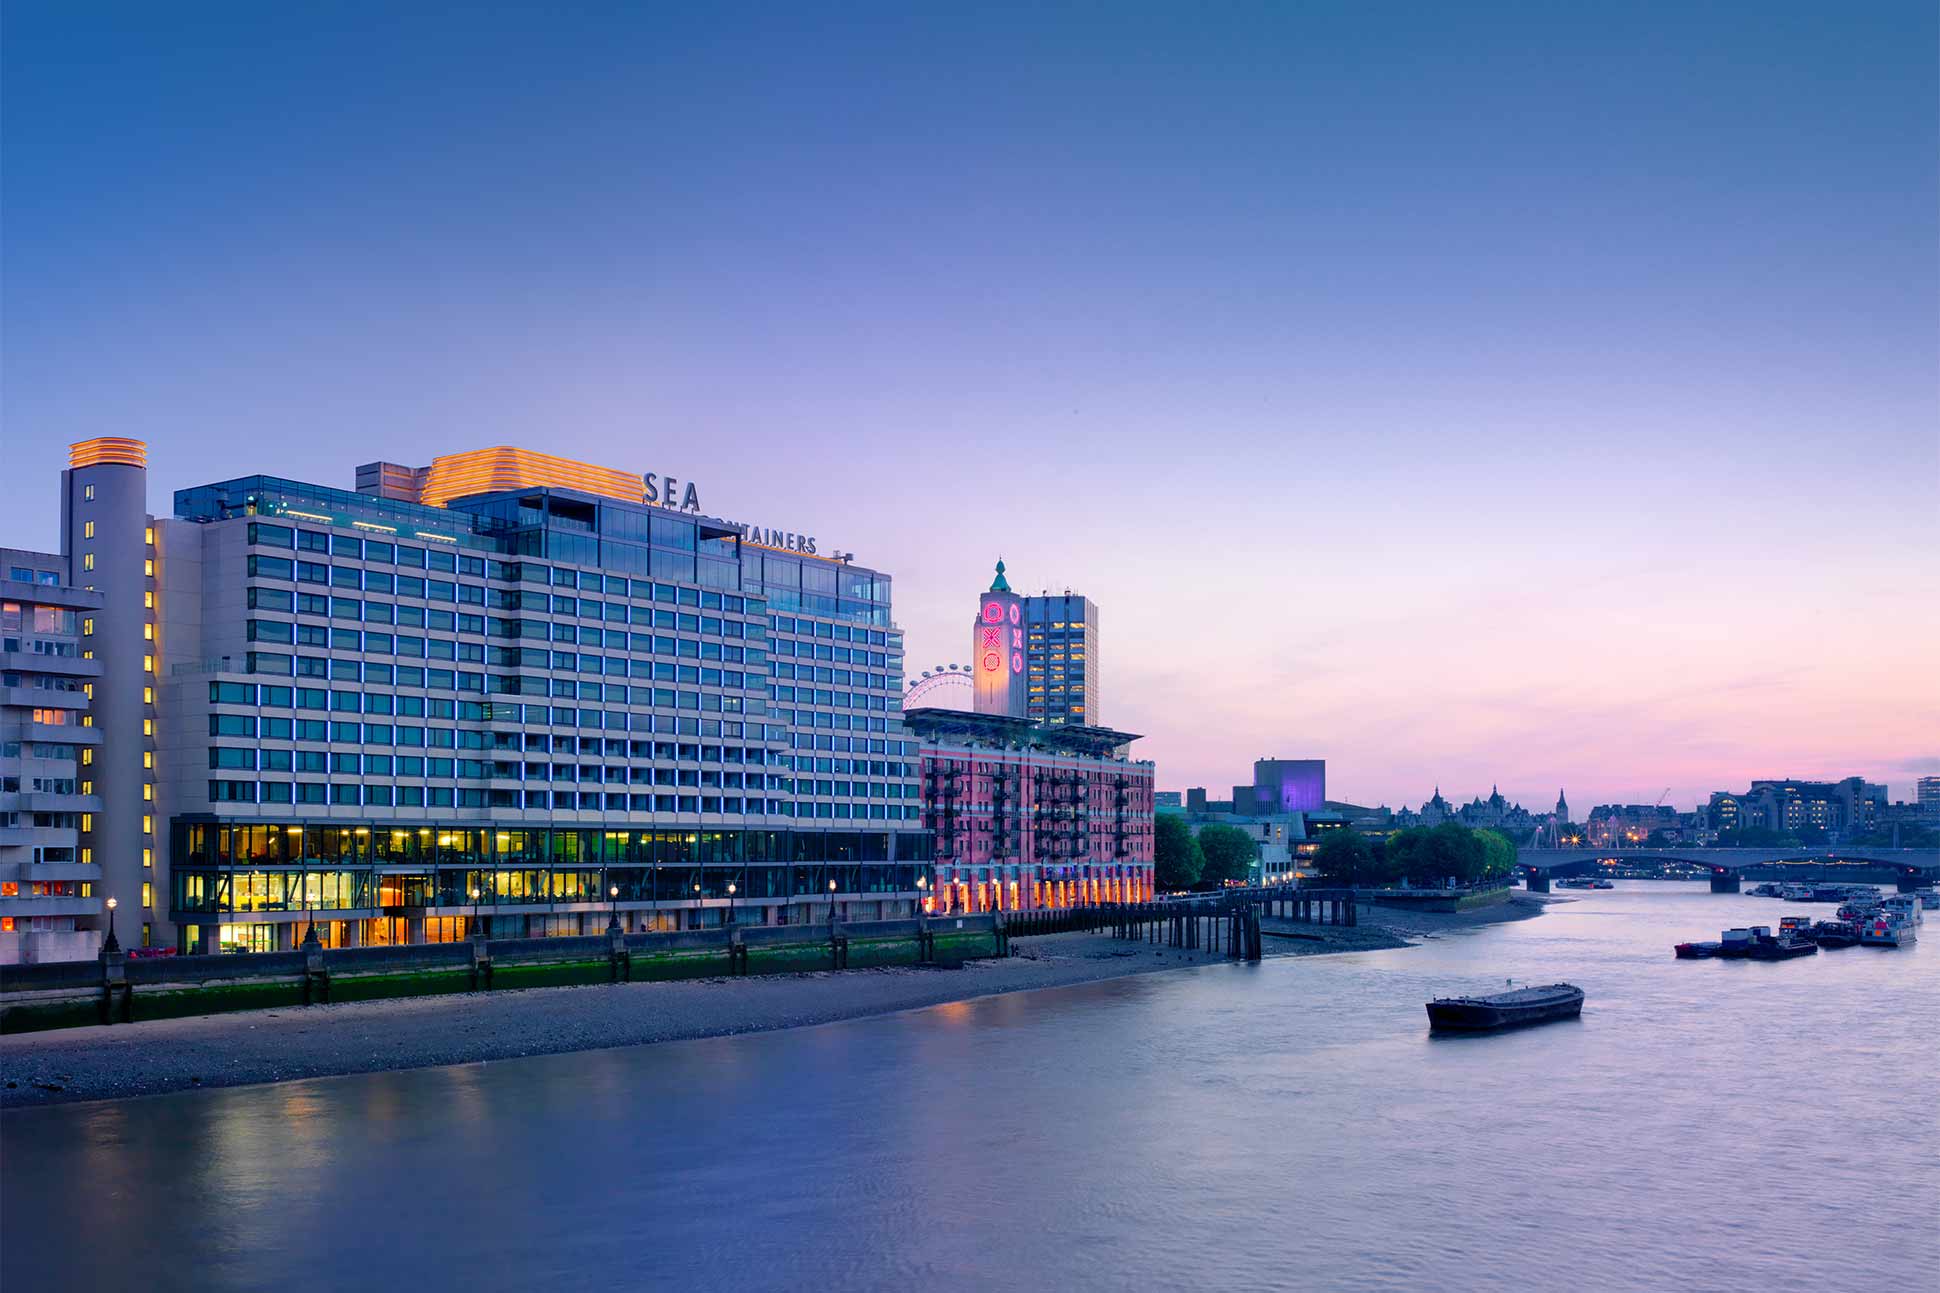 Exterior of Sea Containers, London, United Kingdom